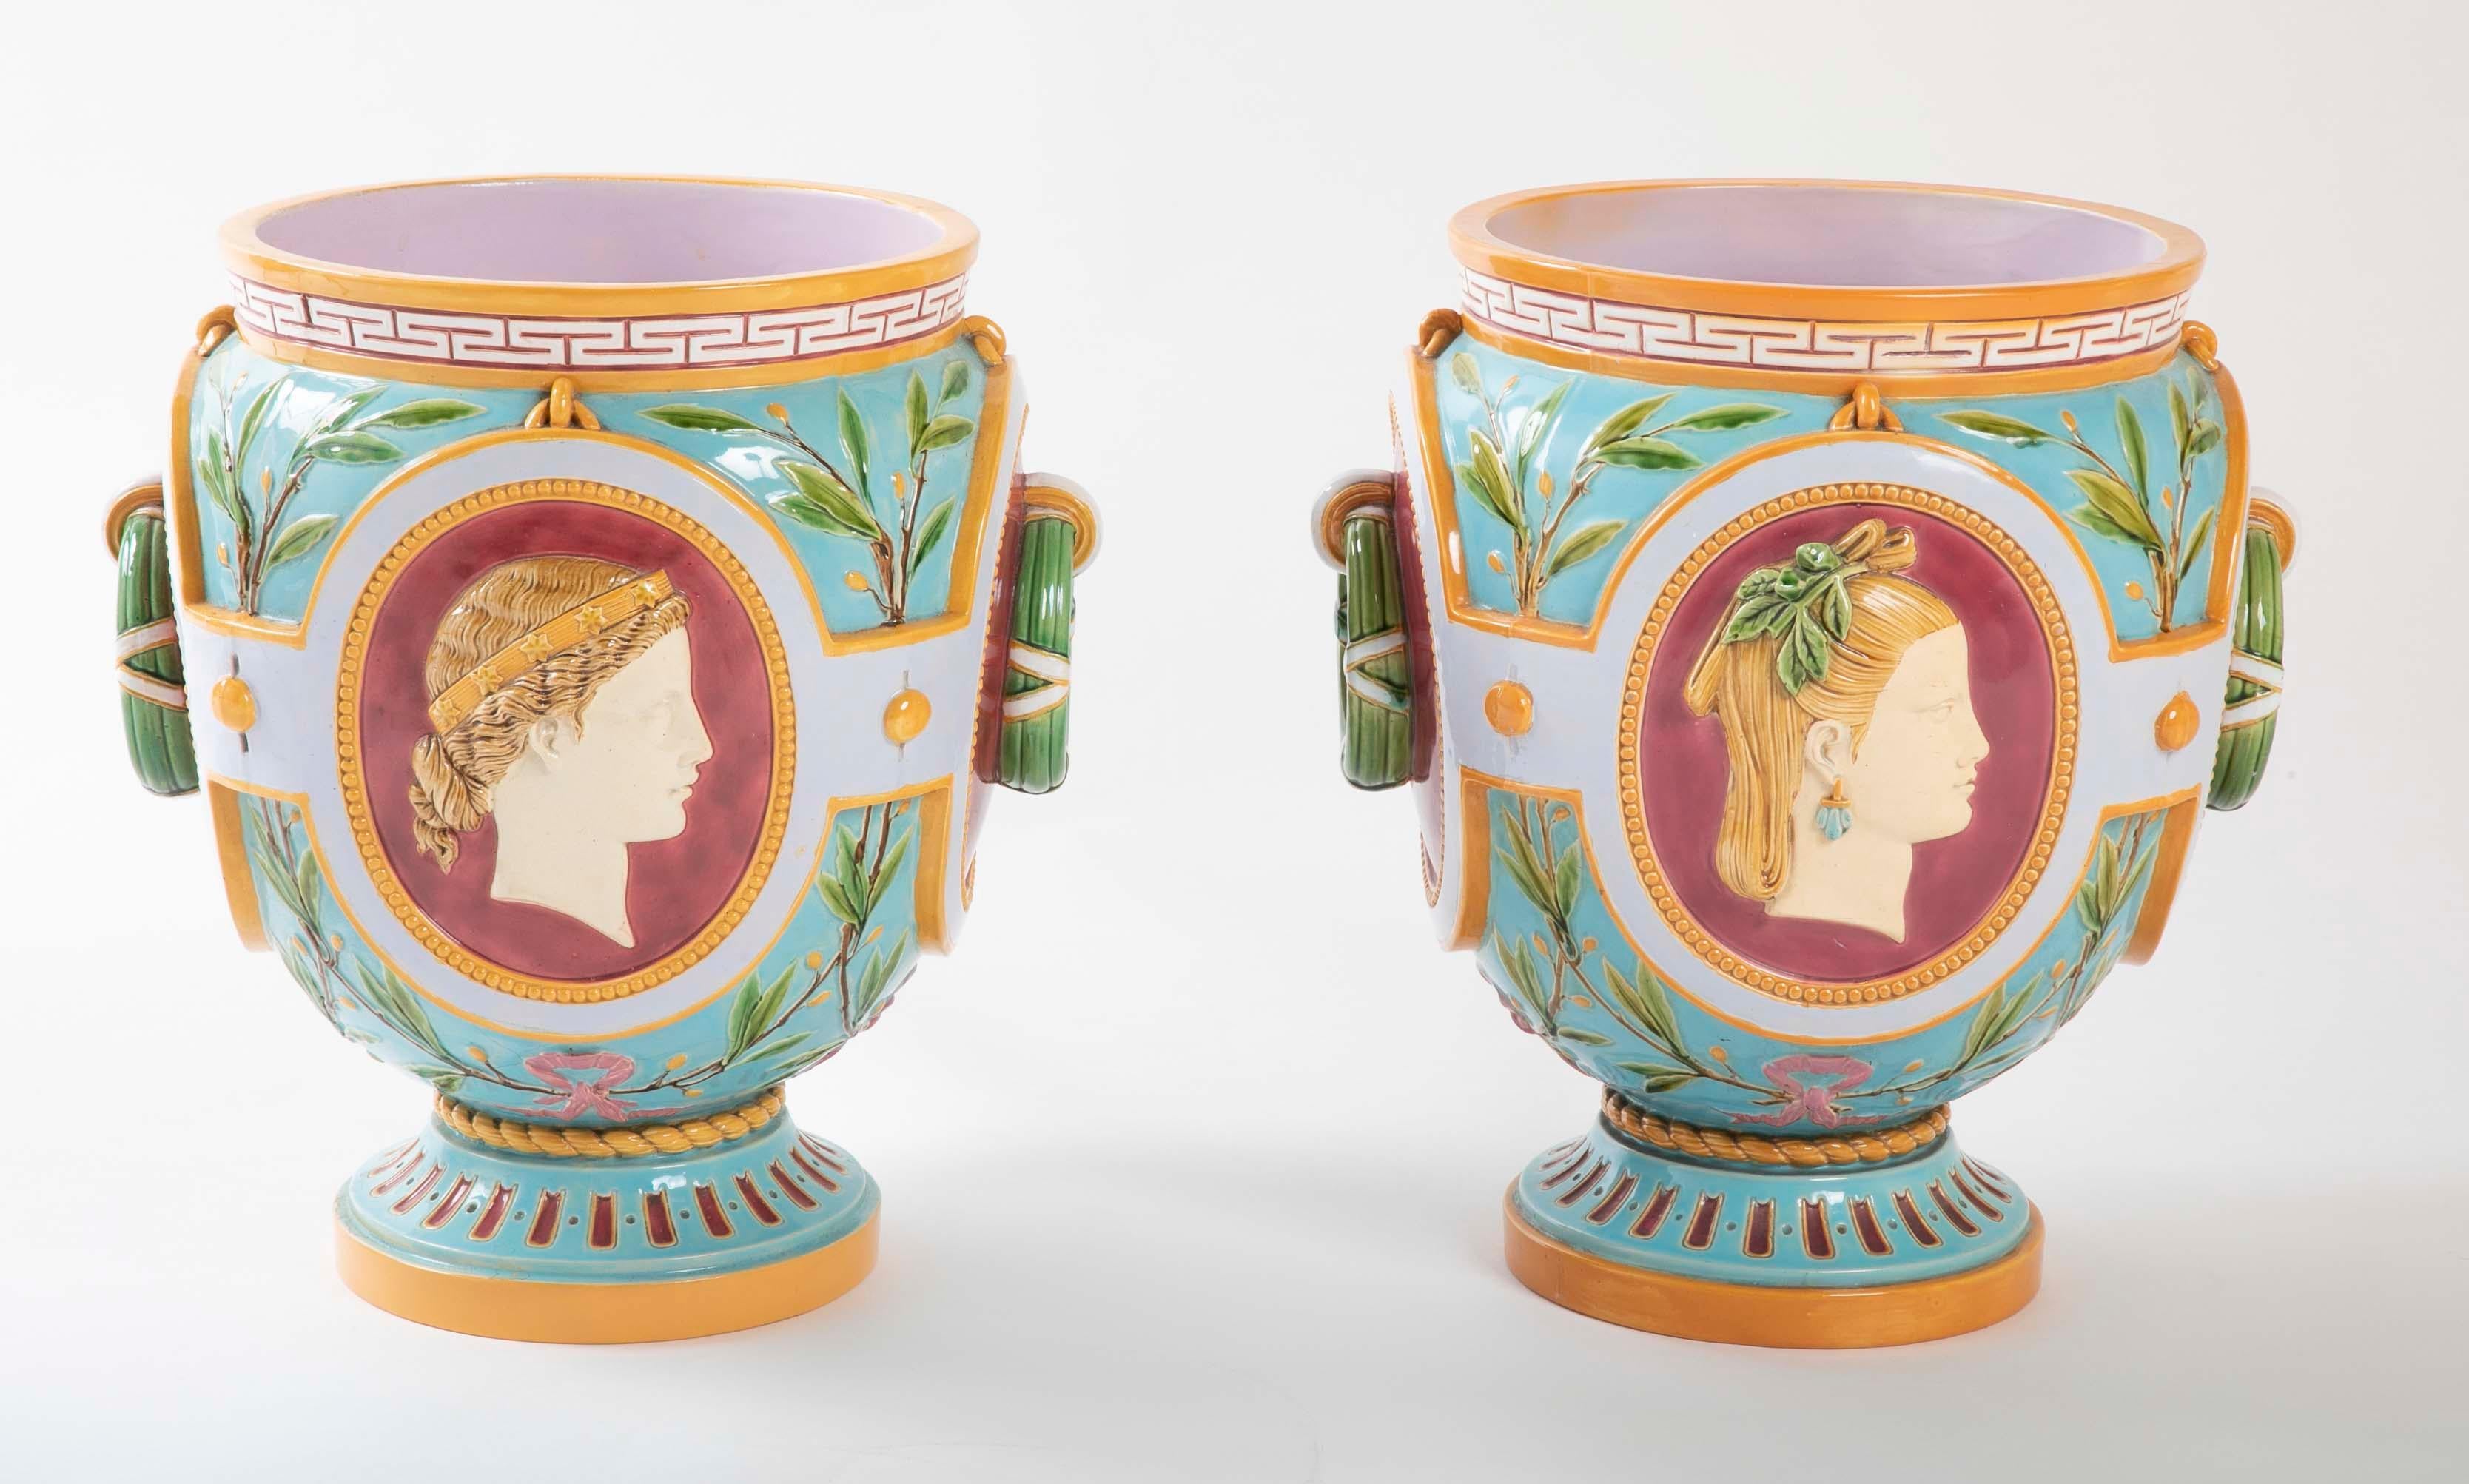 A beautiful pair of English Majolica jardinières by Thomas Minton. Shape numbers 1388 and 1389.